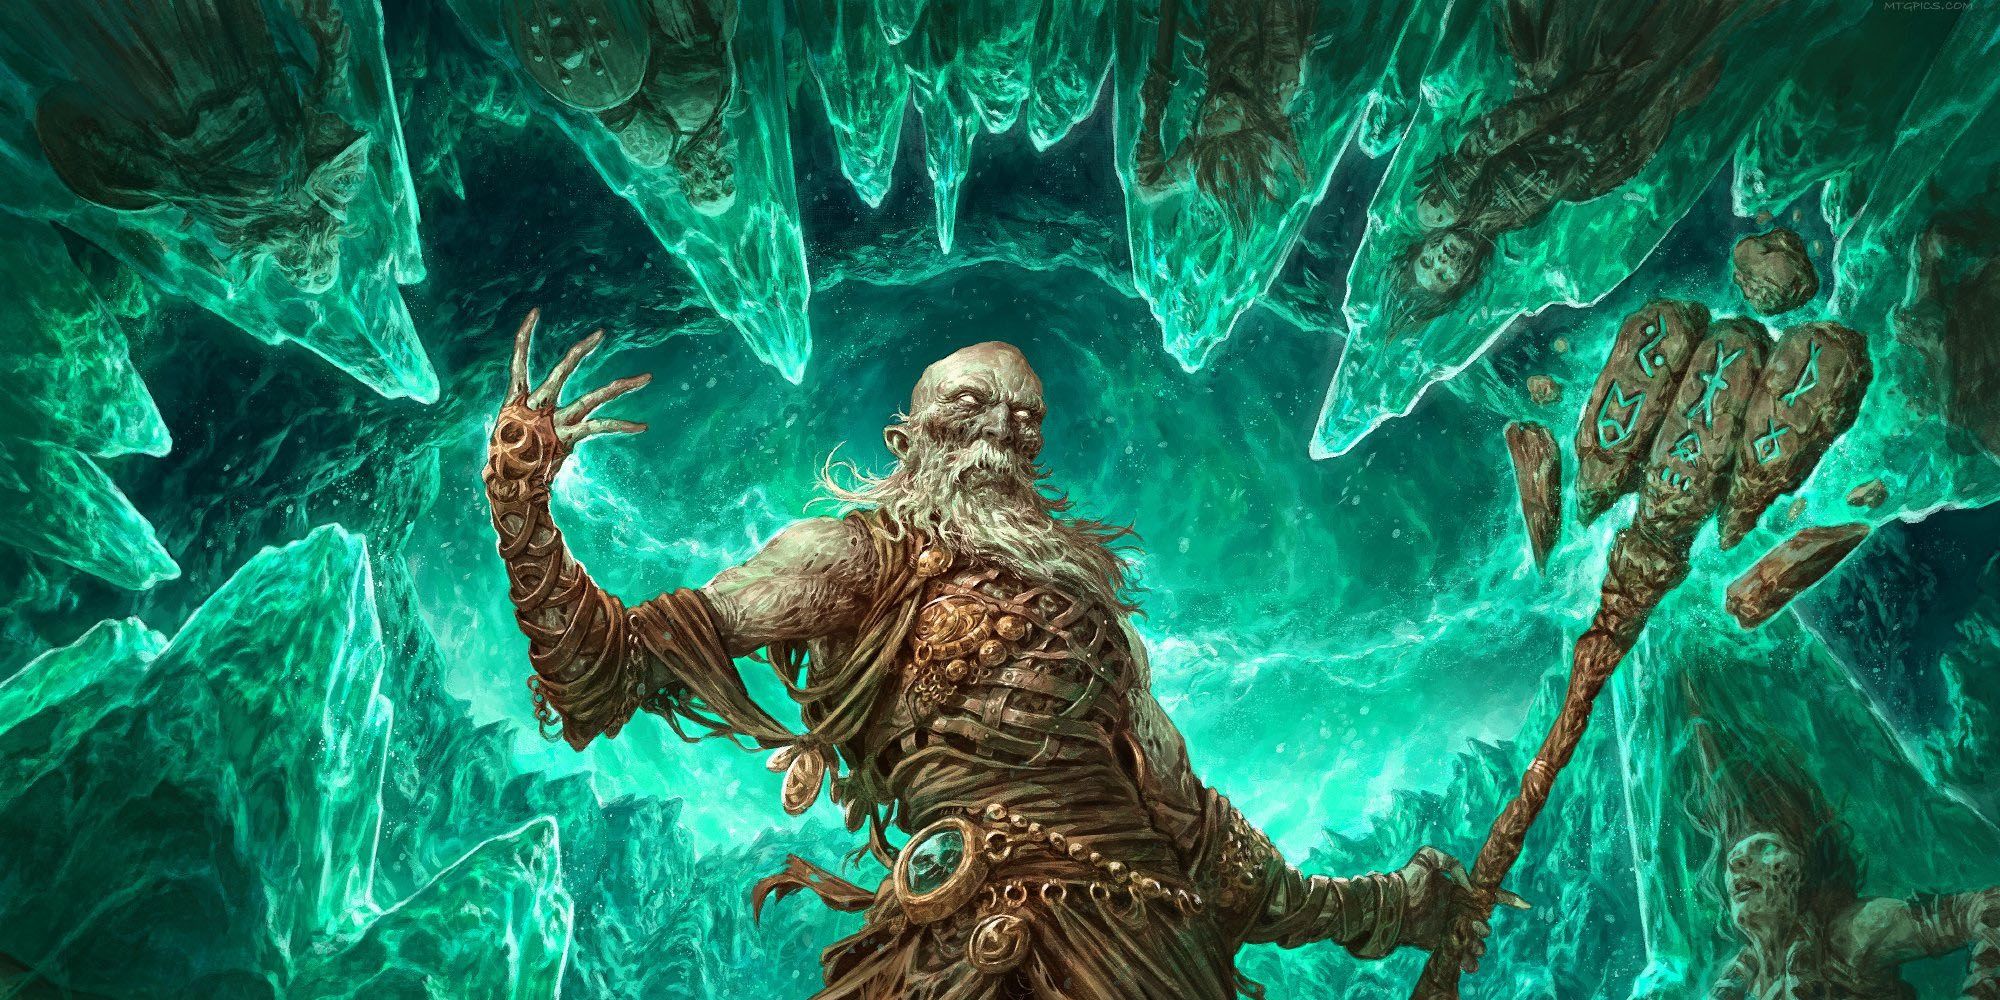 MTG Draugr Necromancer card art showing a man with a staff surrounded by bodies in green crystals